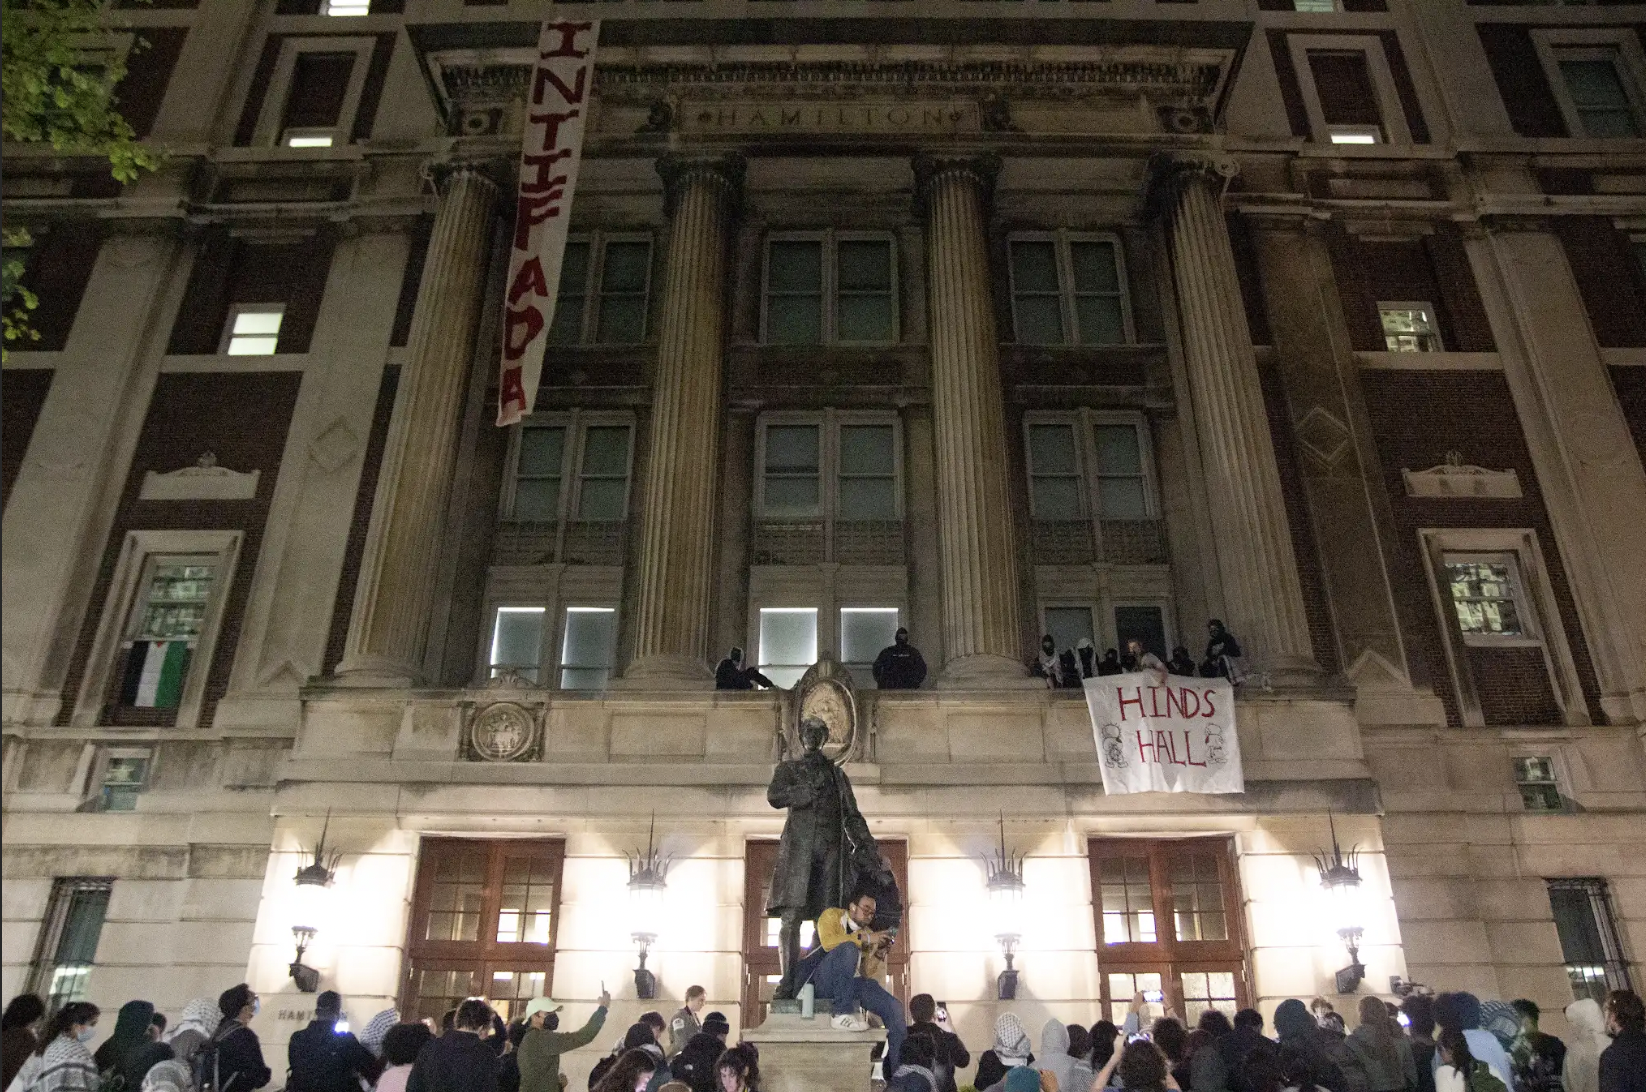 Student protestors occupied Hamilton Hall.(Credit: Indy Scholtens)